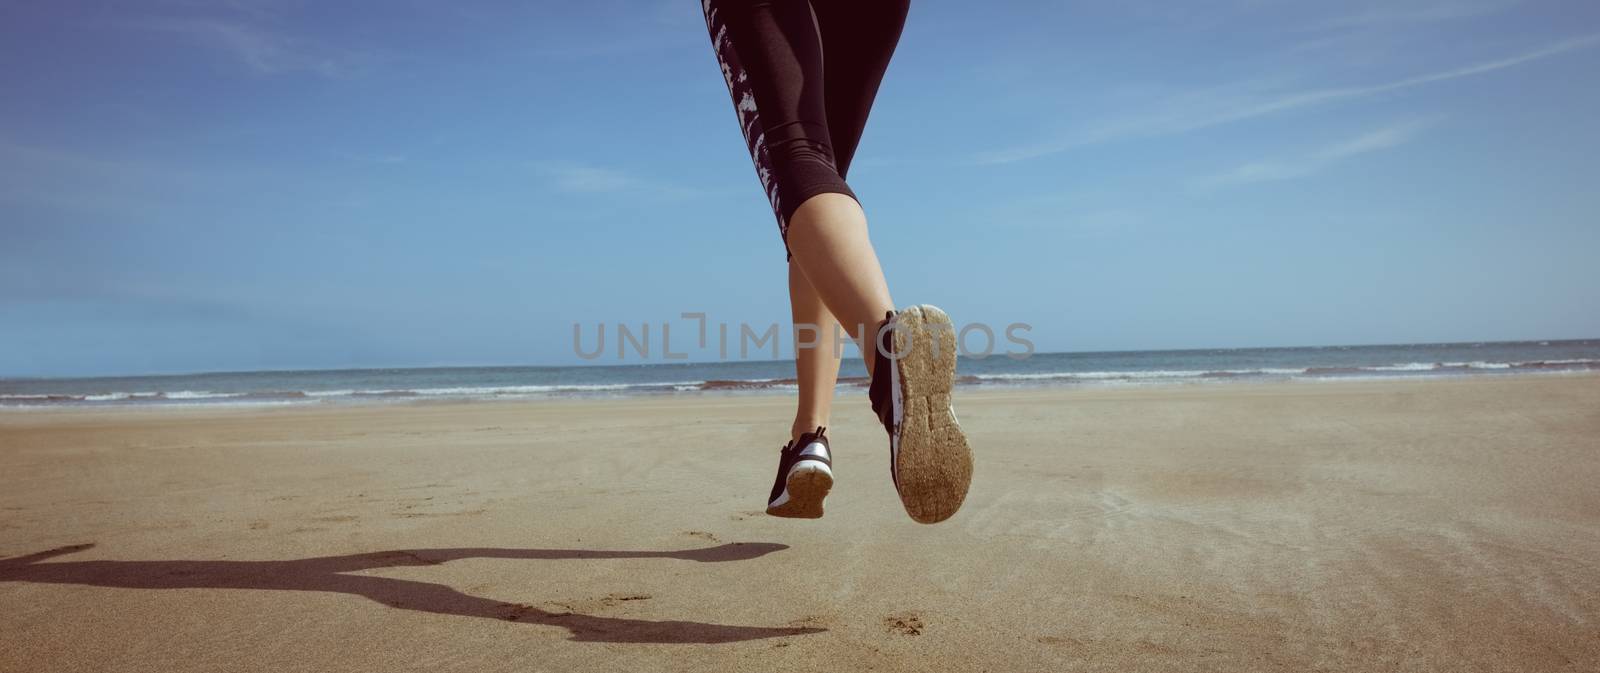 Fit woman jogging on the sand at the beach